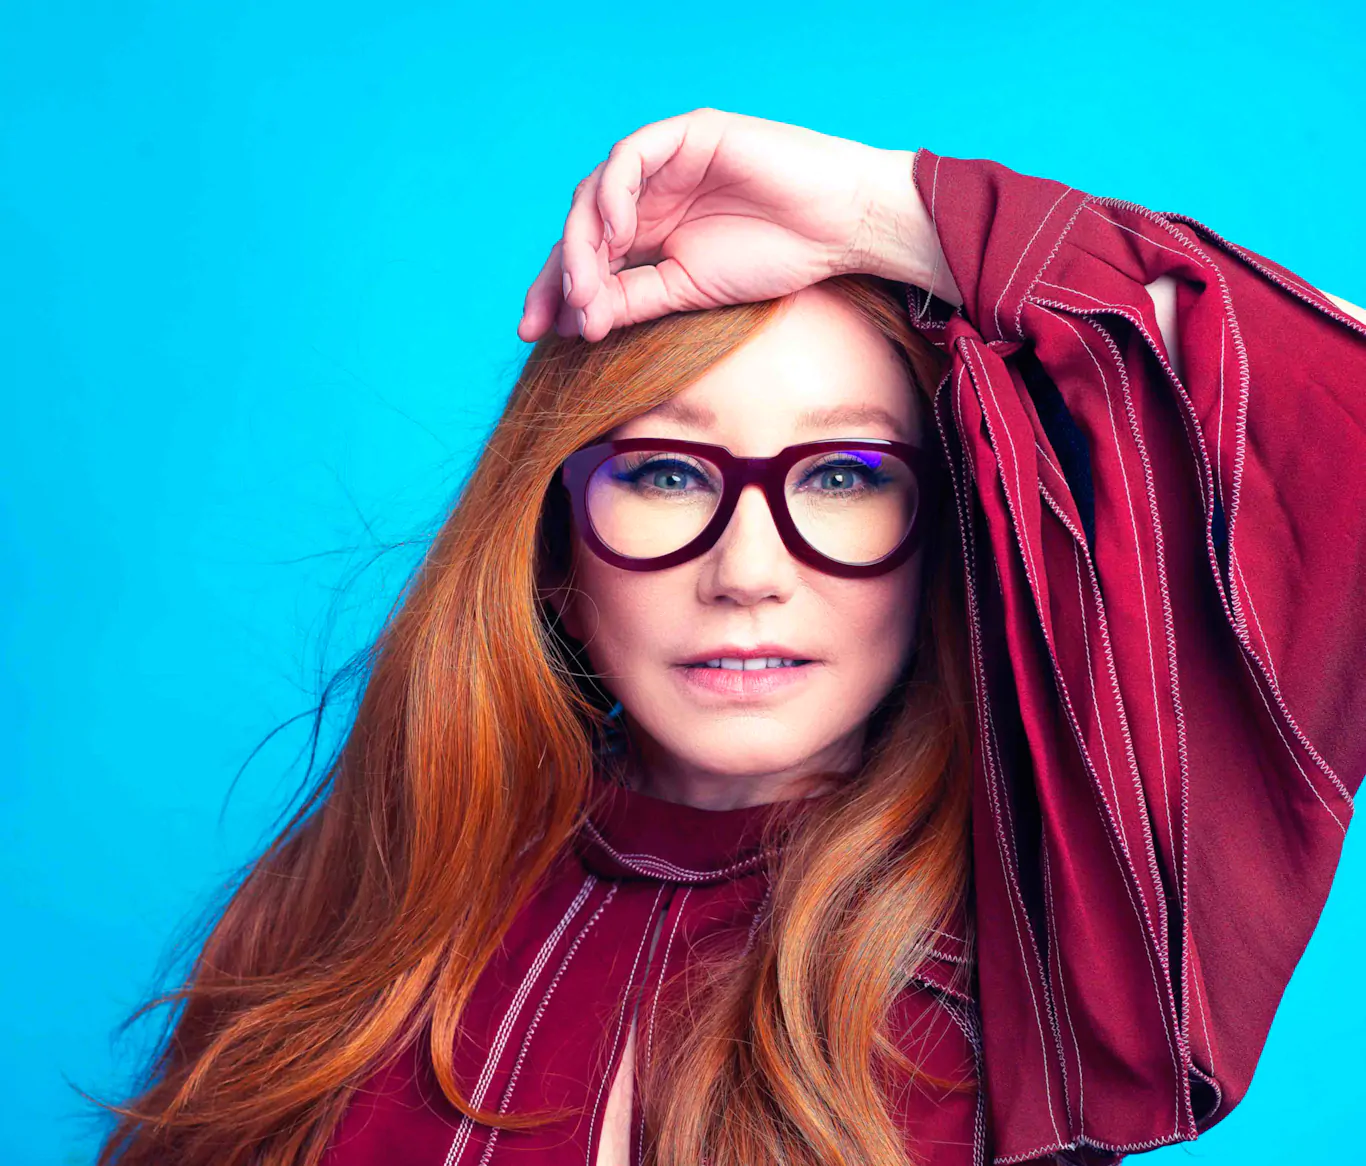 TORI AMOS announces headline show at Ulster Hall, Belfast on March 27th 2023